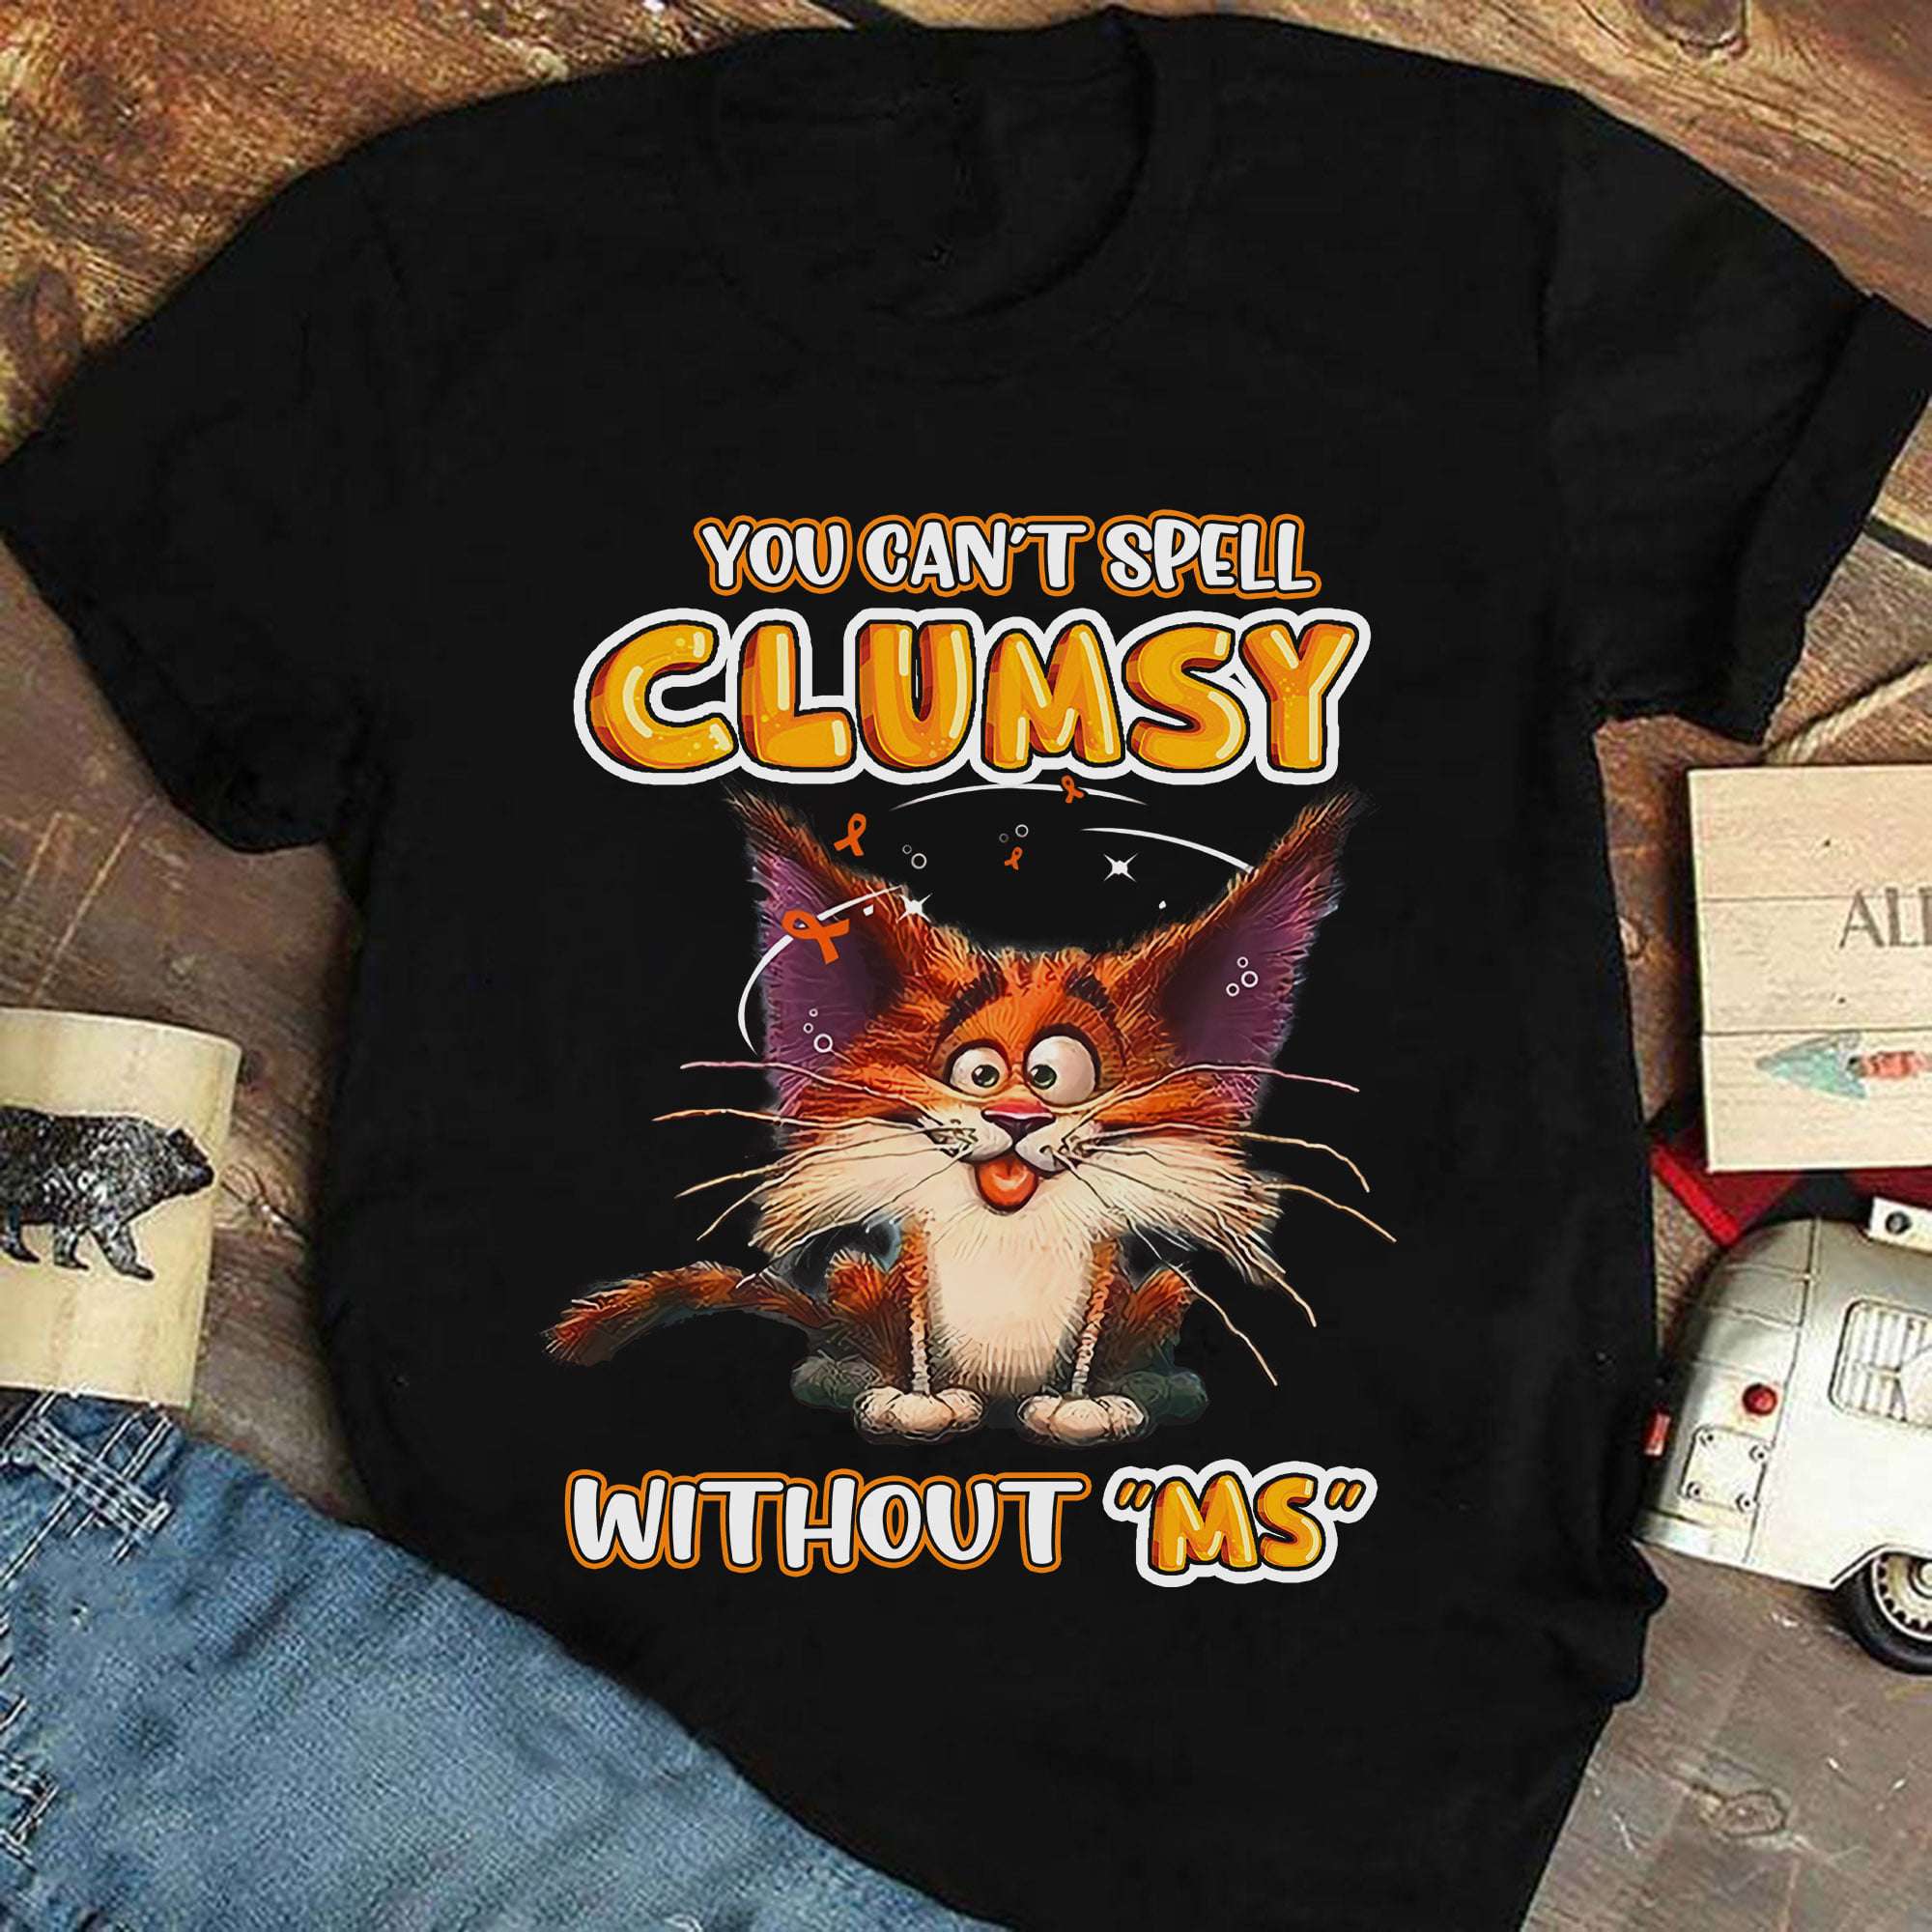 Multiple Sclerosis Cat - You can't spell clumsy without "MS"